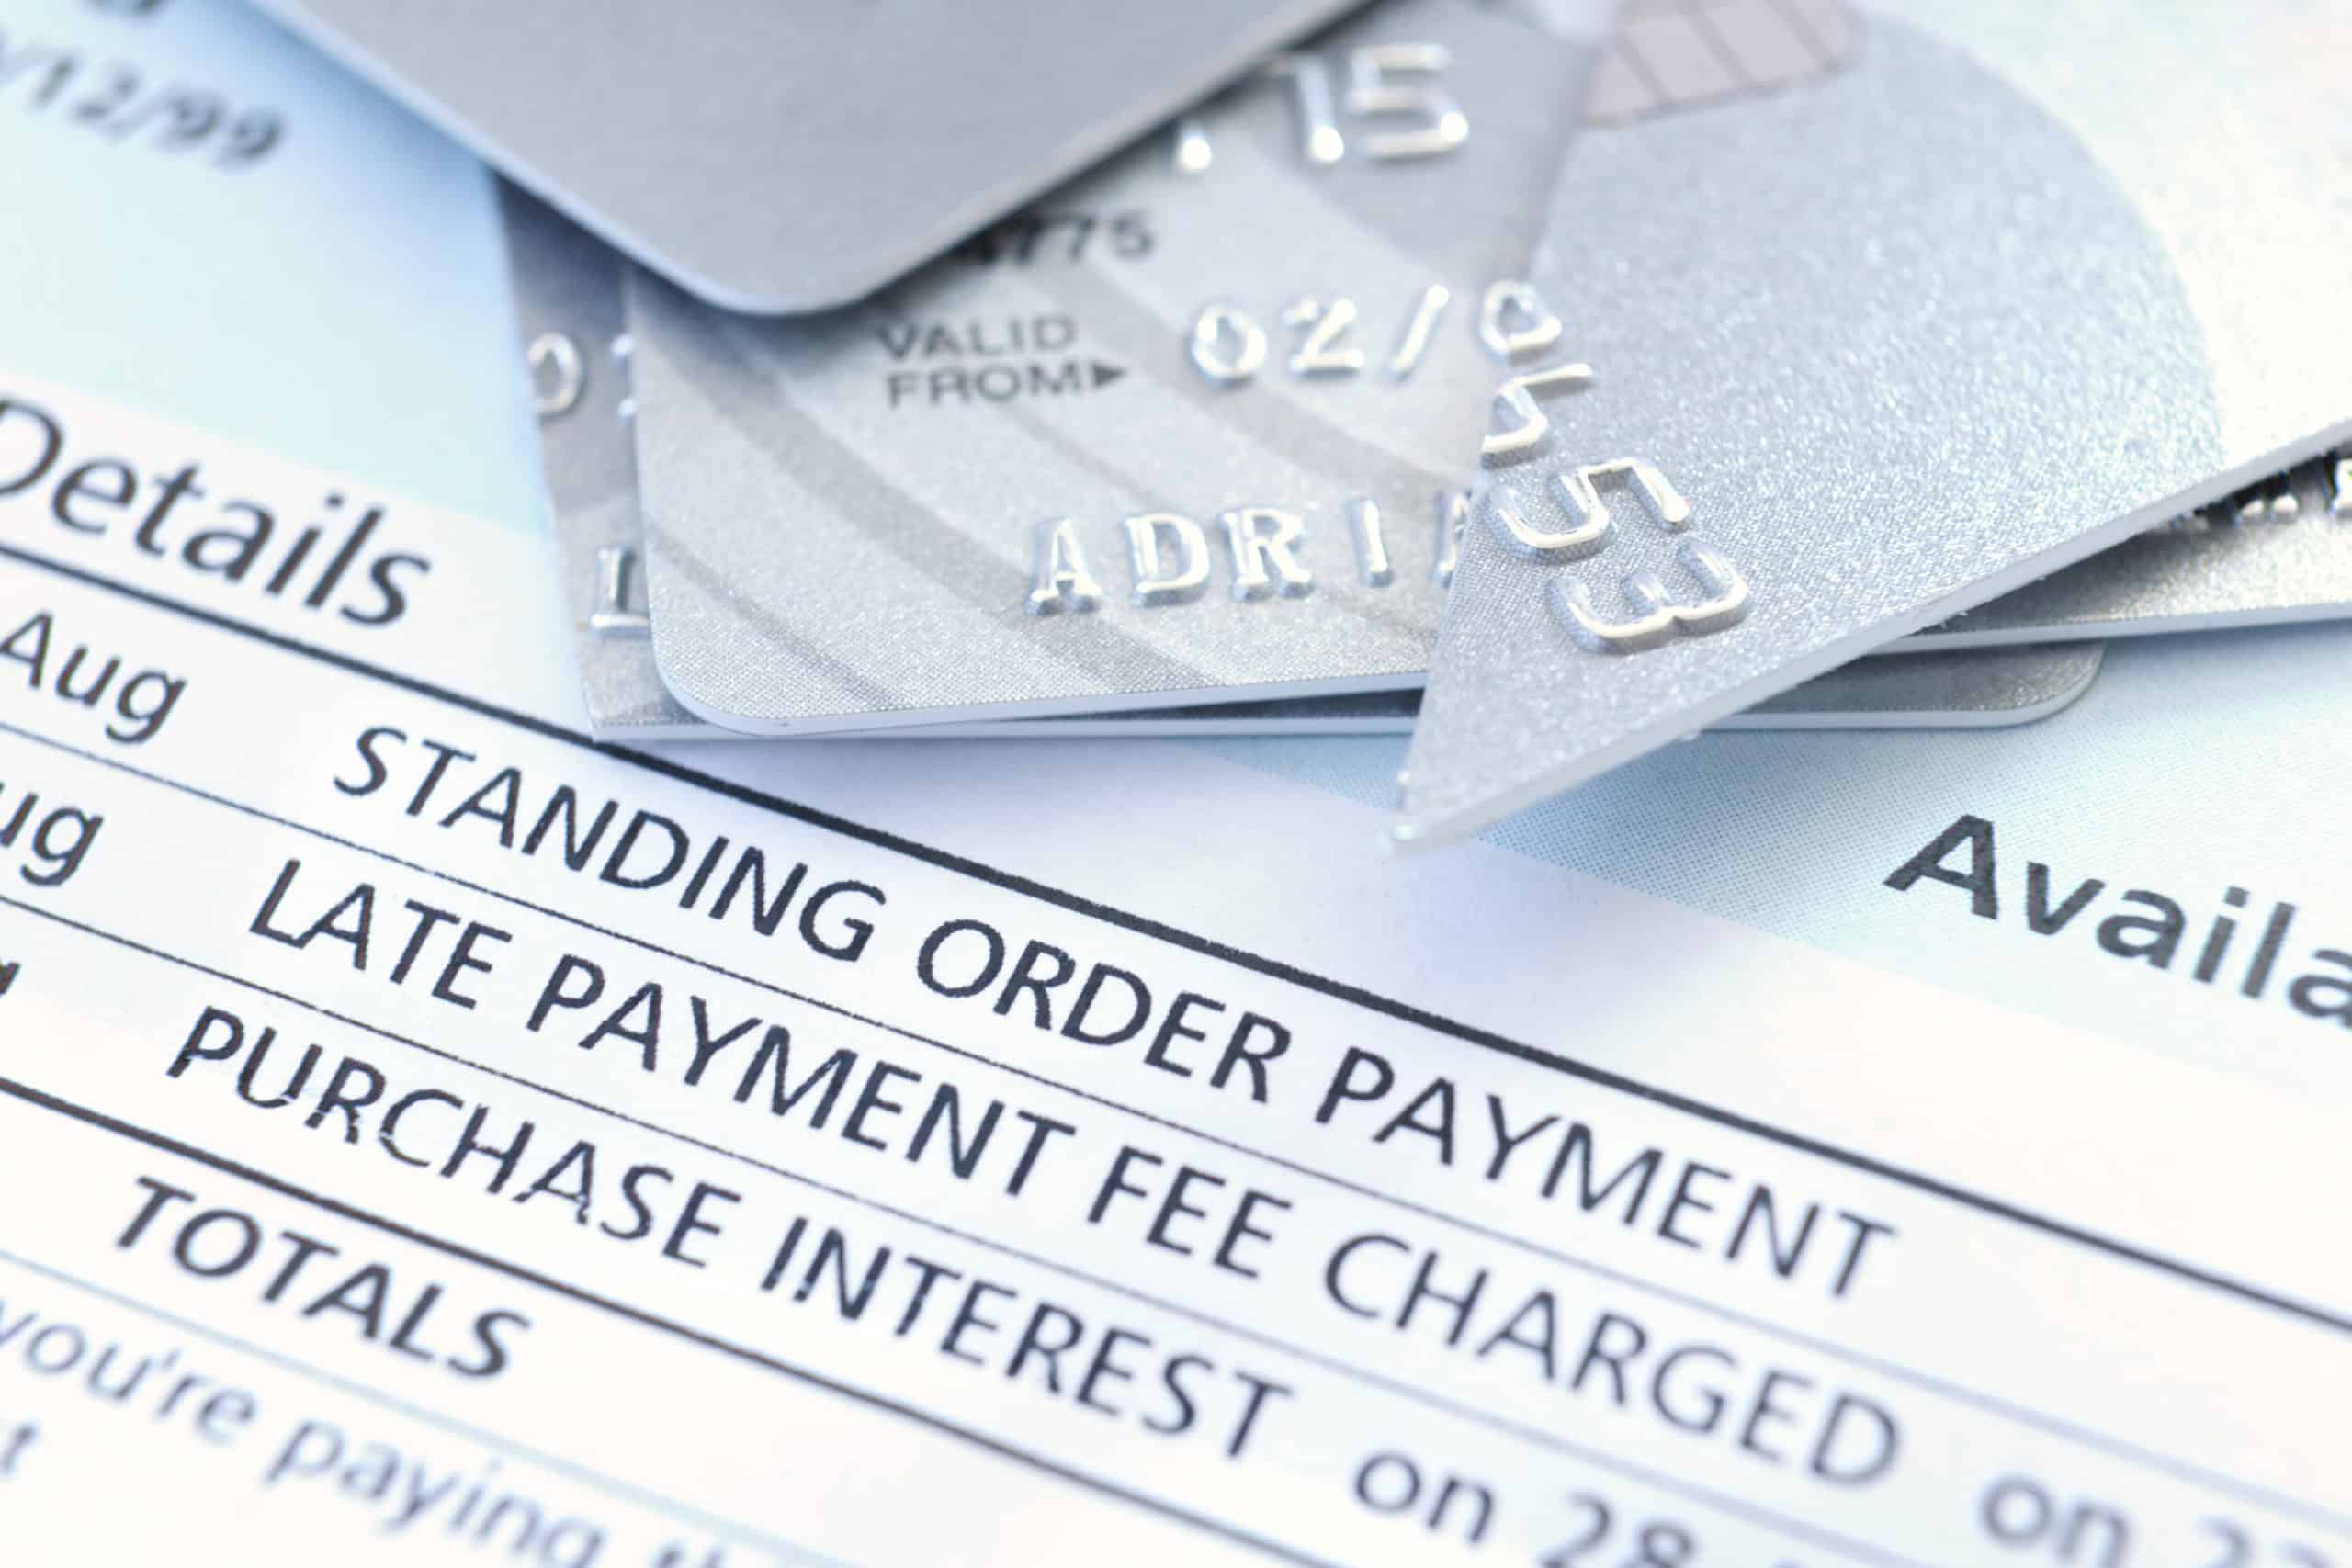 Want To Learn How to Read Your Credit Card Statement?